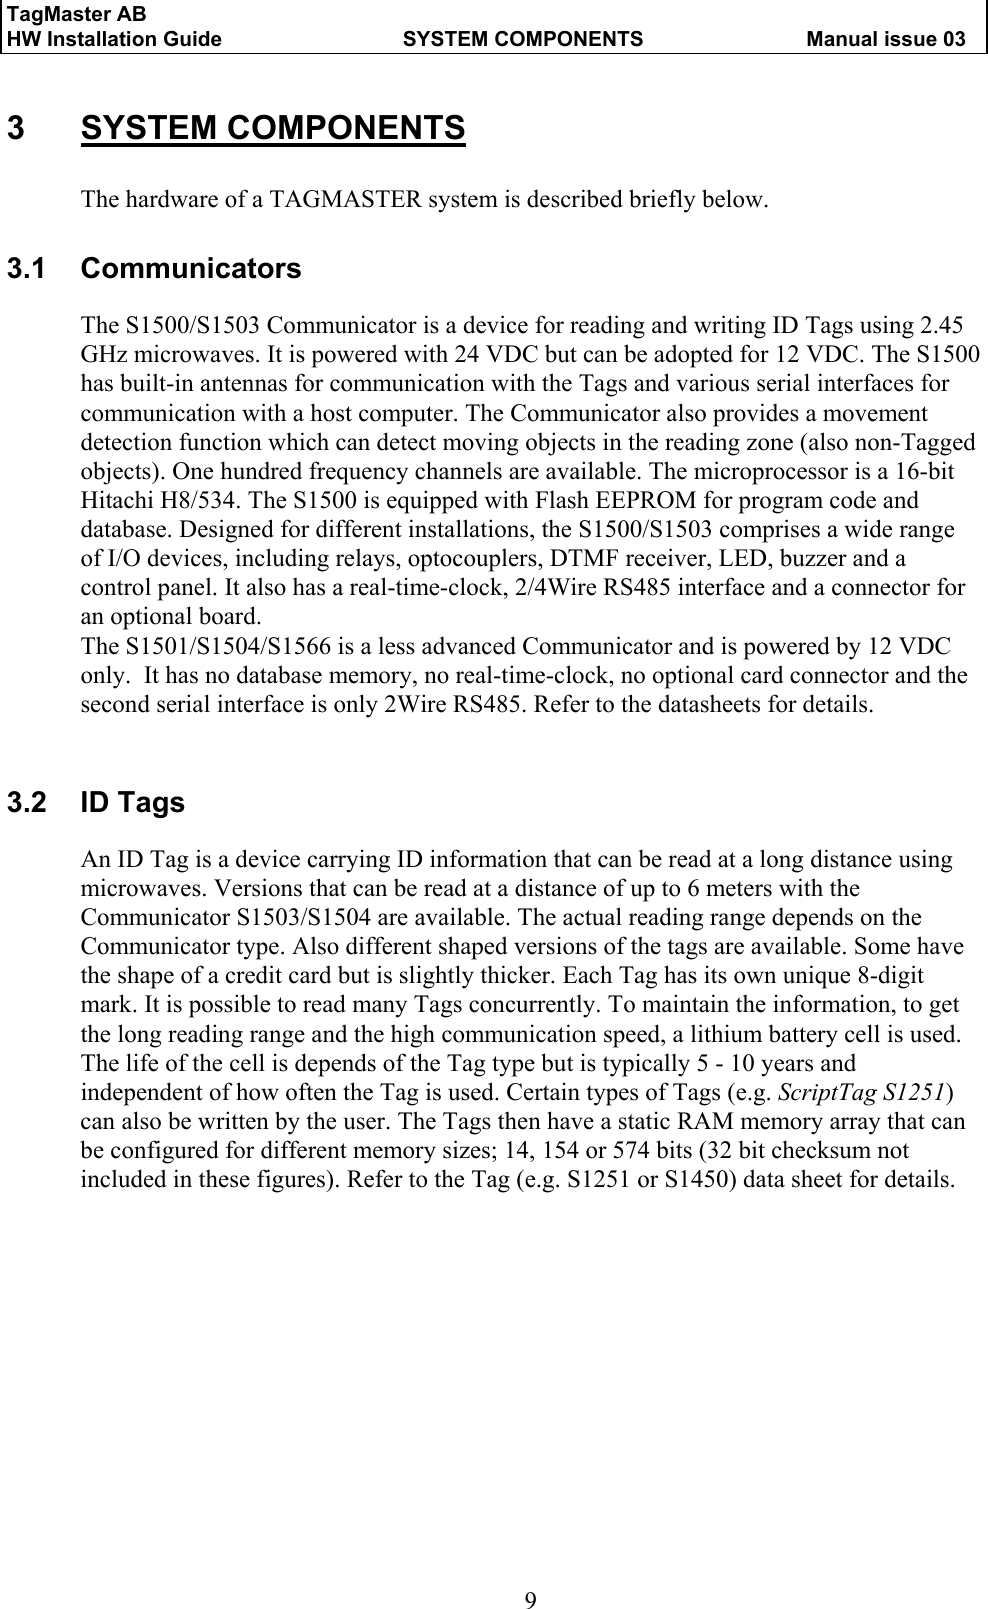 TagMaster AB     HW Installation Guide  SYSTEM COMPONENTS  Manual issue 03  9 3 SYSTEM COMPONENTS The hardware of a TAGMASTER system is described briefly below. 3.1 Communicators The S1500/S1503 Communicator is a device for reading and writing ID Tags using 2.45 GHz microwaves. It is powered with 24 VDC but can be adopted for 12 VDC. The S1500 has built-in antennas for communication with the Tags and various serial interfaces for communication with a host computer. The Communicator also provides a movement detection function which can detect moving objects in the reading zone (also non-Tagged objects). One hundred frequency channels are available. The microprocessor is a 16-bit Hitachi H8/534. The S1500 is equipped with Flash EEPROM for program code and database. Designed for different installations, the S1500/S1503 comprises a wide range of I/O devices, including relays, optocouplers, DTMF receiver, LED, buzzer and a control panel. It also has a real-time-clock, 2/4Wire RS485 interface and a connector for an optional board.  The S1501/S1504/S1566 is a less advanced Communicator and is powered by 12 VDC only.  It has no database memory, no real-time-clock, no optional card connector and the second serial interface is only 2Wire RS485. Refer to the datasheets for details.  3.2 ID Tags An ID Tag is a device carrying ID information that can be read at a long distance using microwaves. Versions that can be read at a distance of up to 6 meters with the Communicator S1503/S1504 are available. The actual reading range depends on the Communicator type. Also different shaped versions of the tags are available. Some have the shape of a credit card but is slightly thicker. Each Tag has its own unique 8-digit mark. It is possible to read many Tags concurrently. To maintain the information, to get the long reading range and the high communication speed, a lithium battery cell is used.  The life of the cell is depends of the Tag type but is typically 5 - 10 years and independent of how often the Tag is used. Certain types of Tags (e.g. ScriptTag S1251) can also be written by the user. The Tags then have a static RAM memory array that can be configured for different memory sizes; 14, 154 or 574 bits (32 bit checksum not included in these figures). Refer to the Tag (e.g. S1251 or S1450) data sheet for details. 